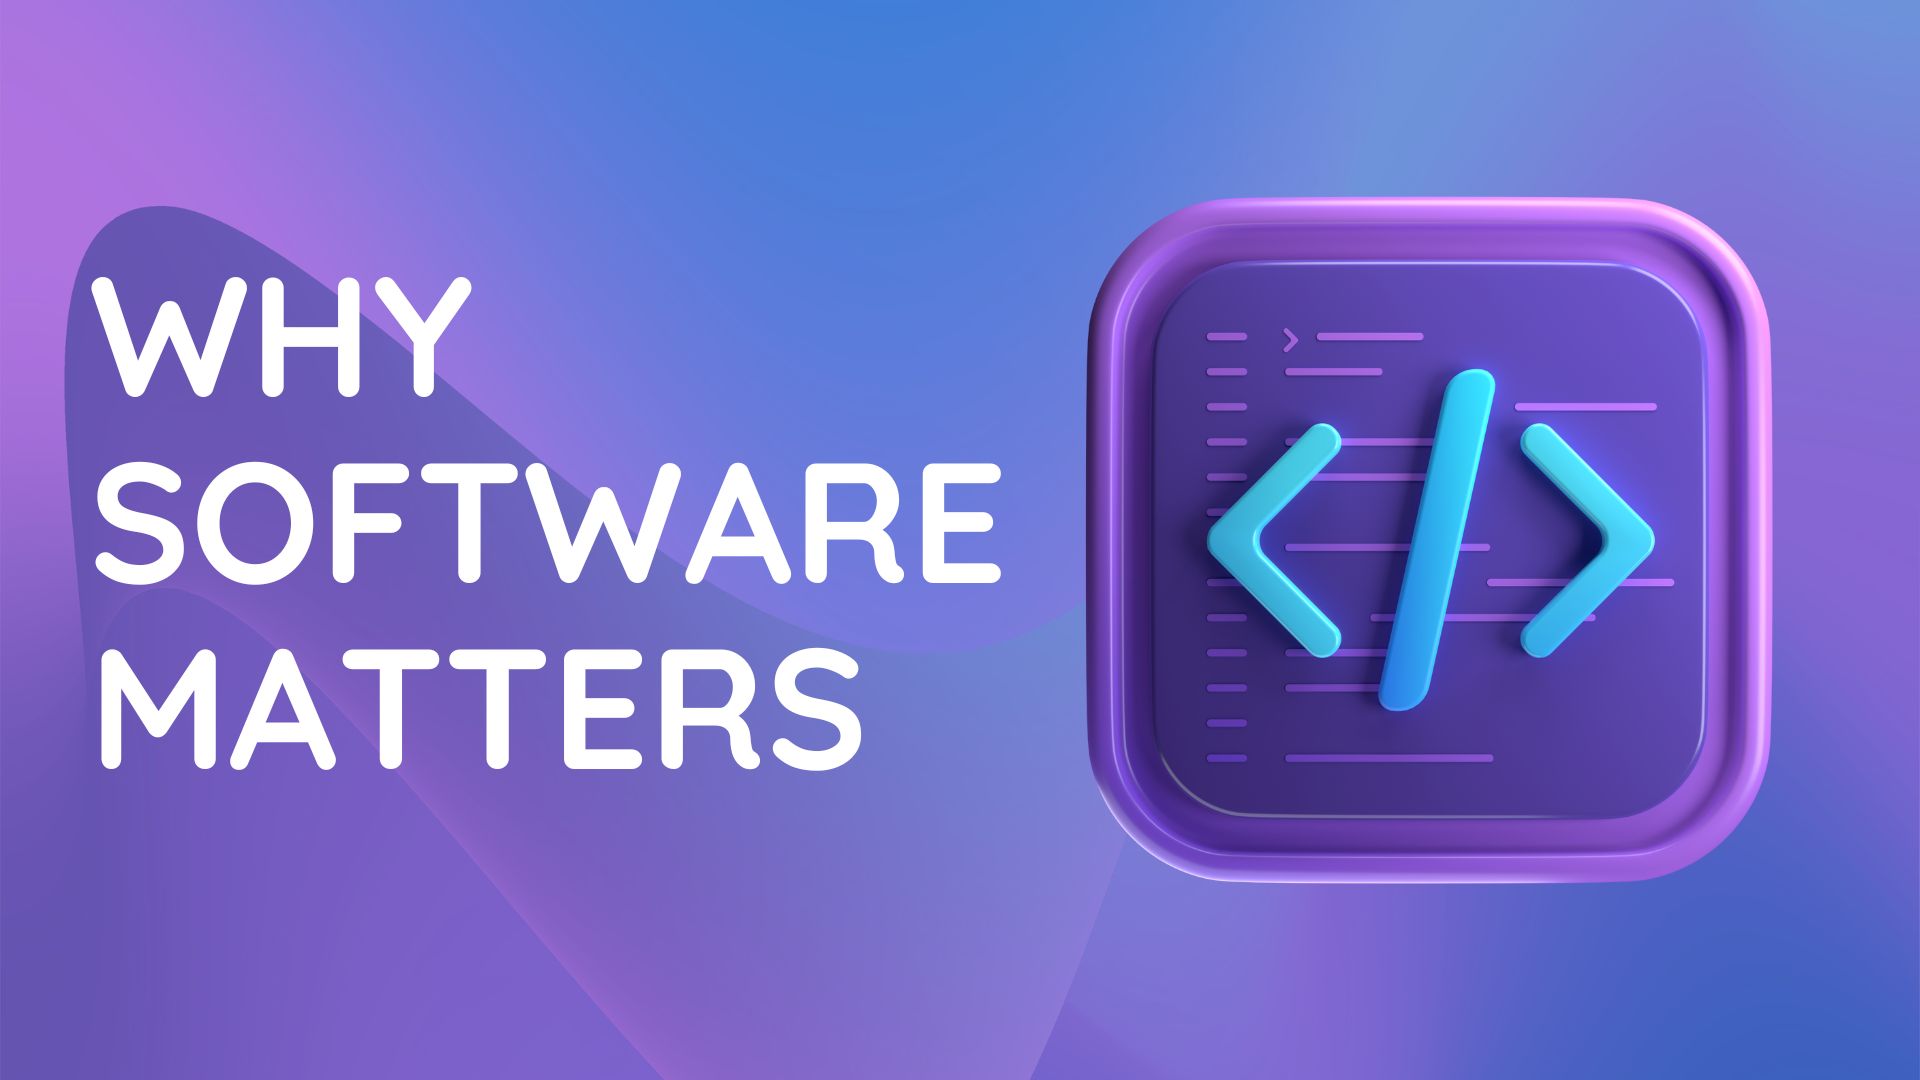 Why software matters